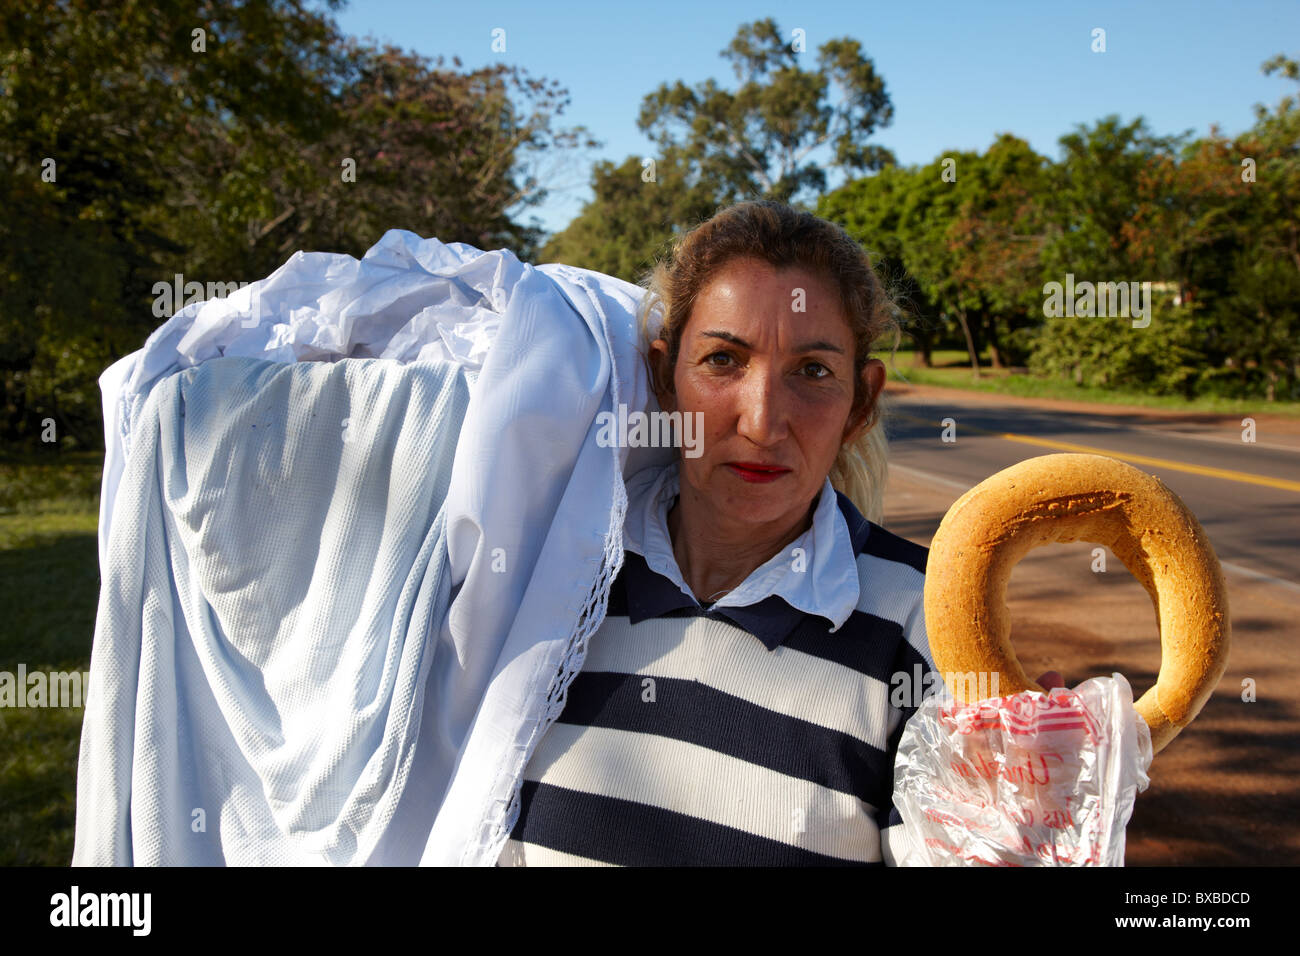 Paraguayan woman selling traditional chipa, Paraguay, South America Stock Photo